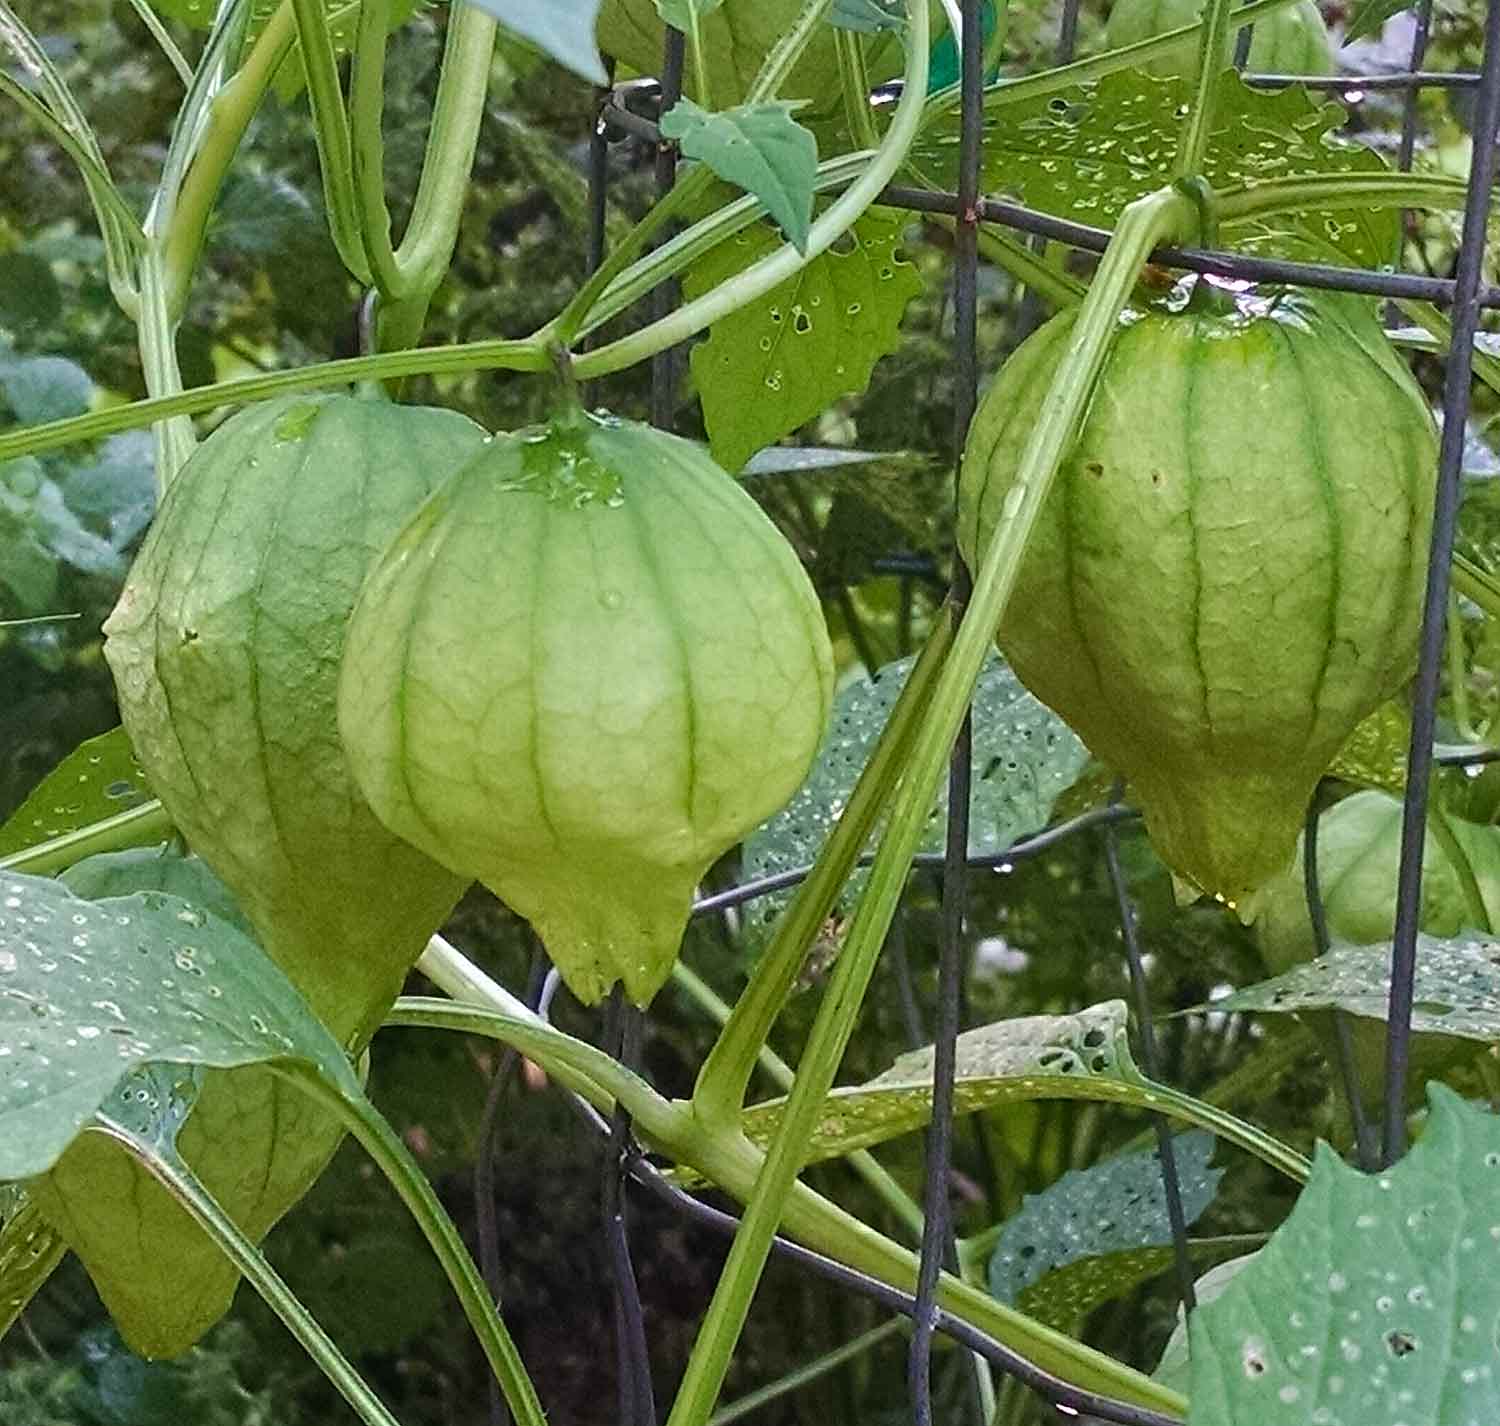 Tomatillos growing on the plant.